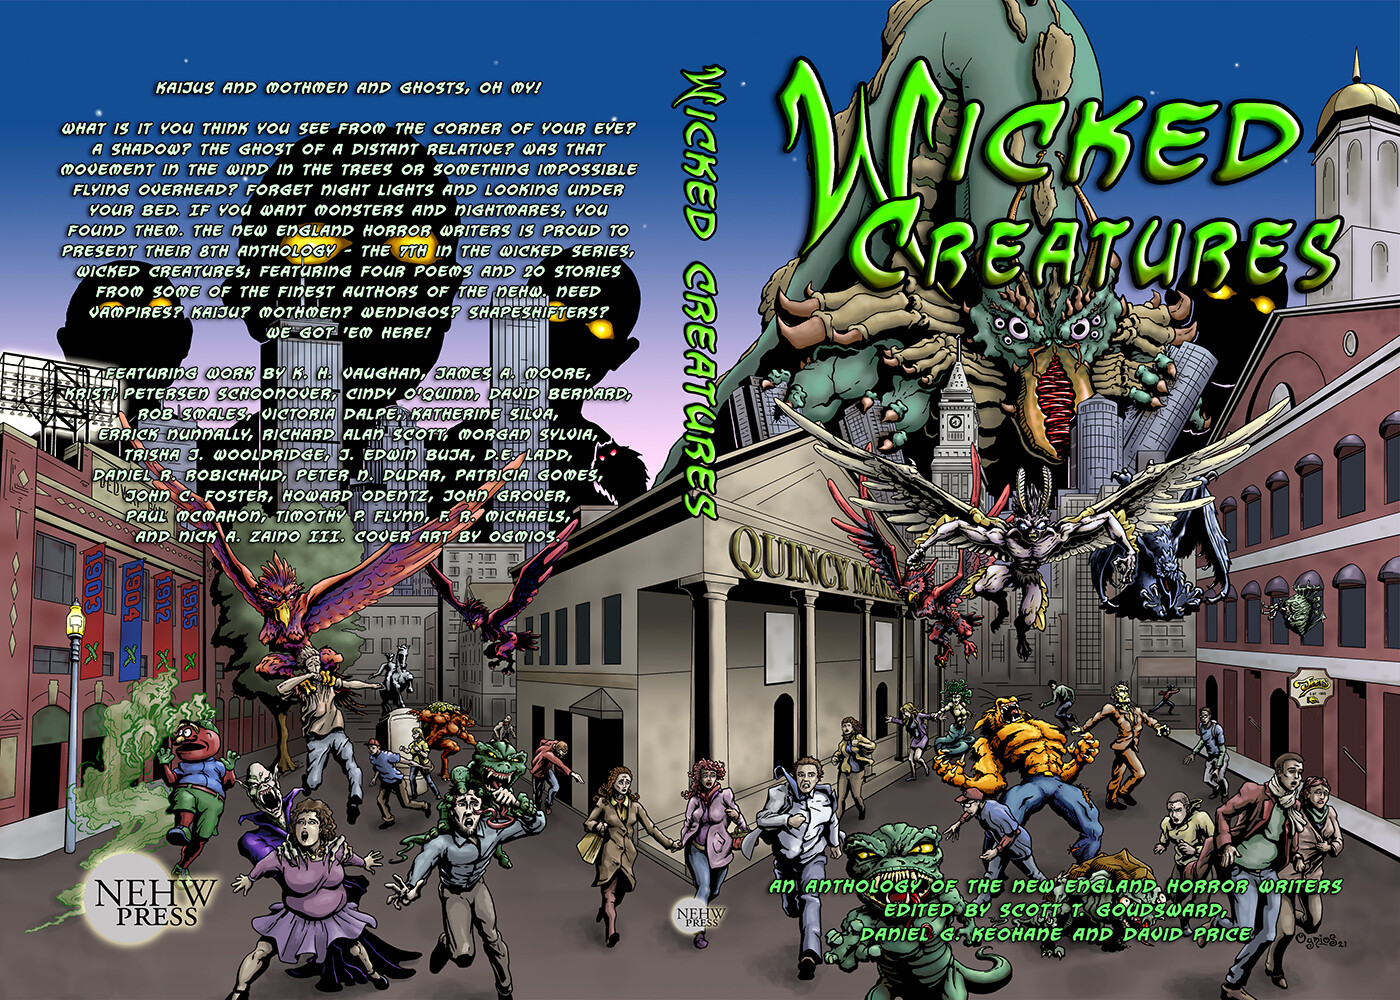 'Wicked Creatures' Cover Art and Graphics